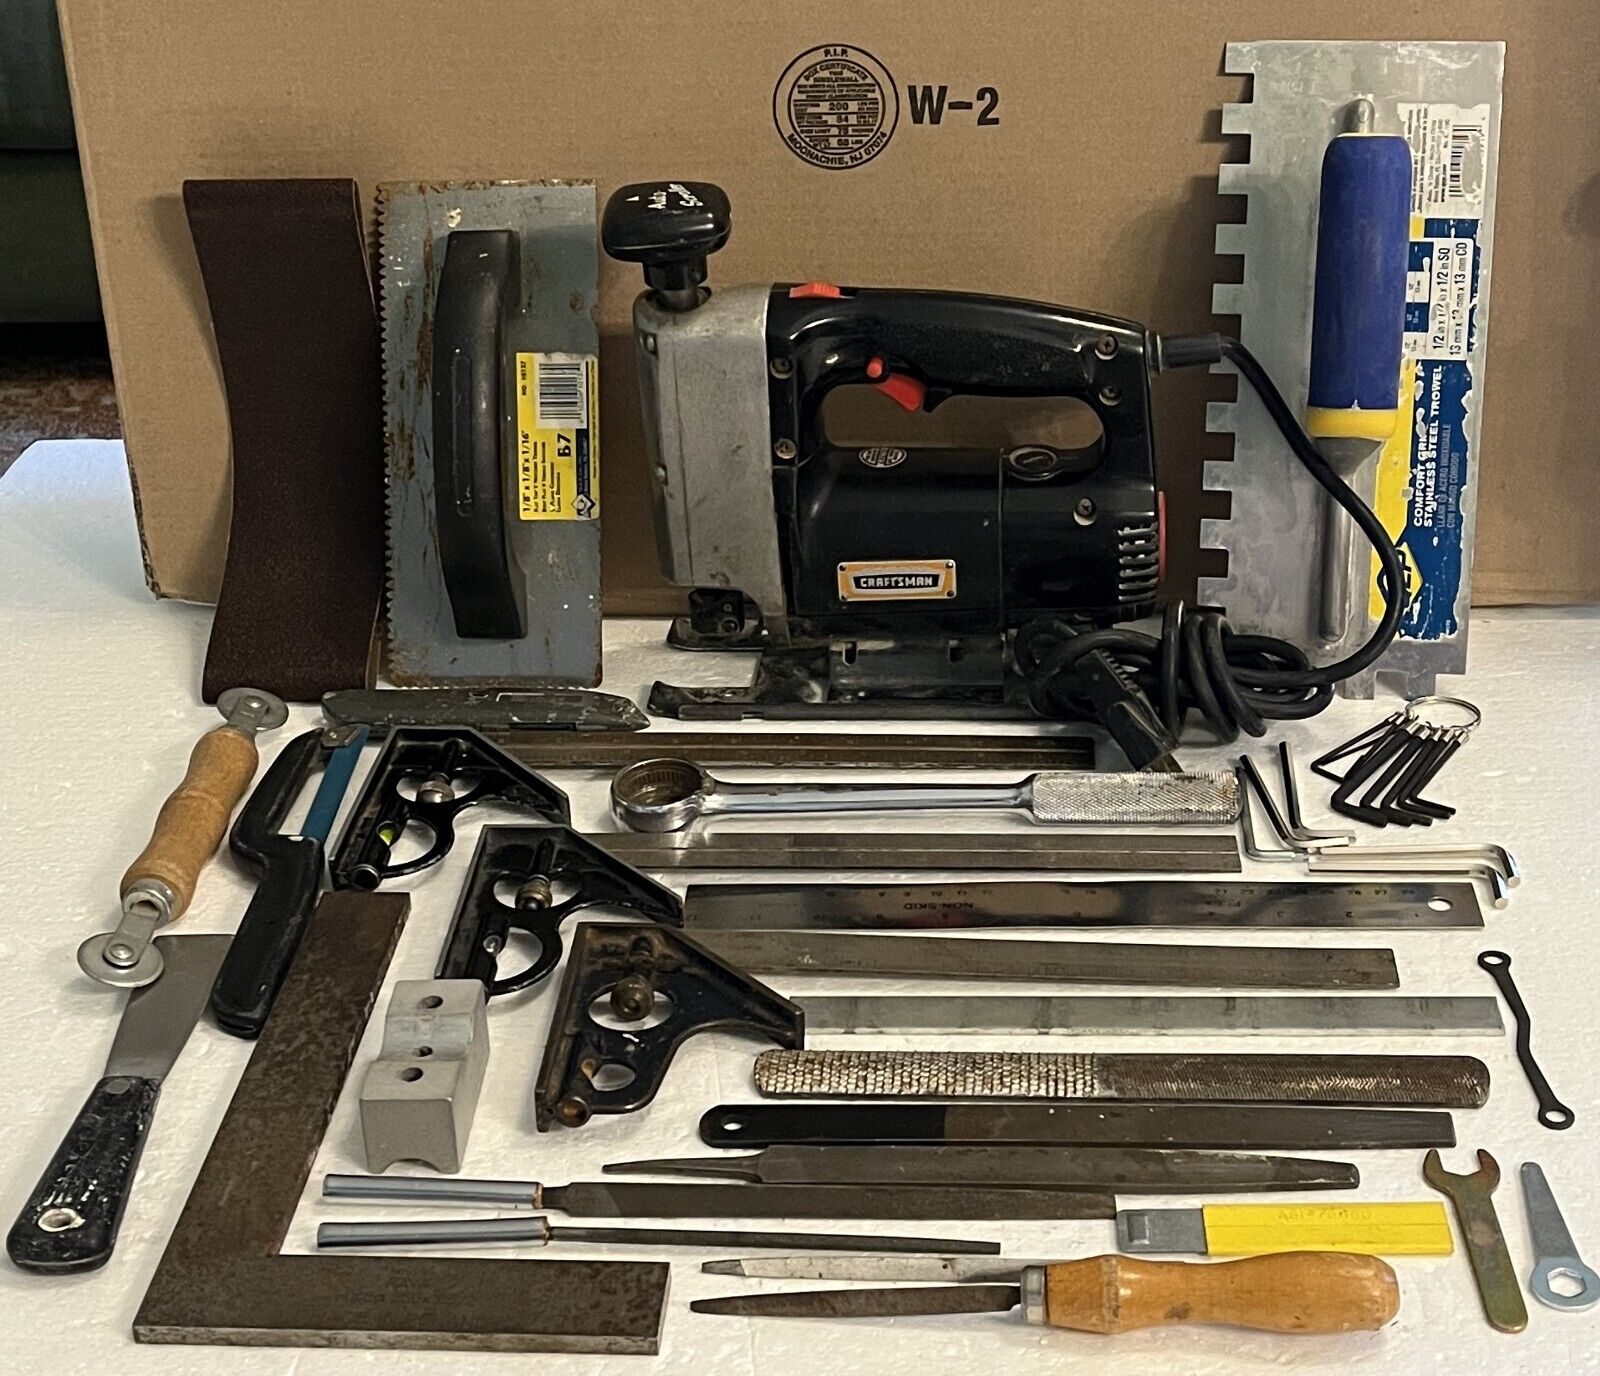 35+pieces Tools: Saw Sears, Hex Keys, Squares/Levels, Trowels, Files, Knives